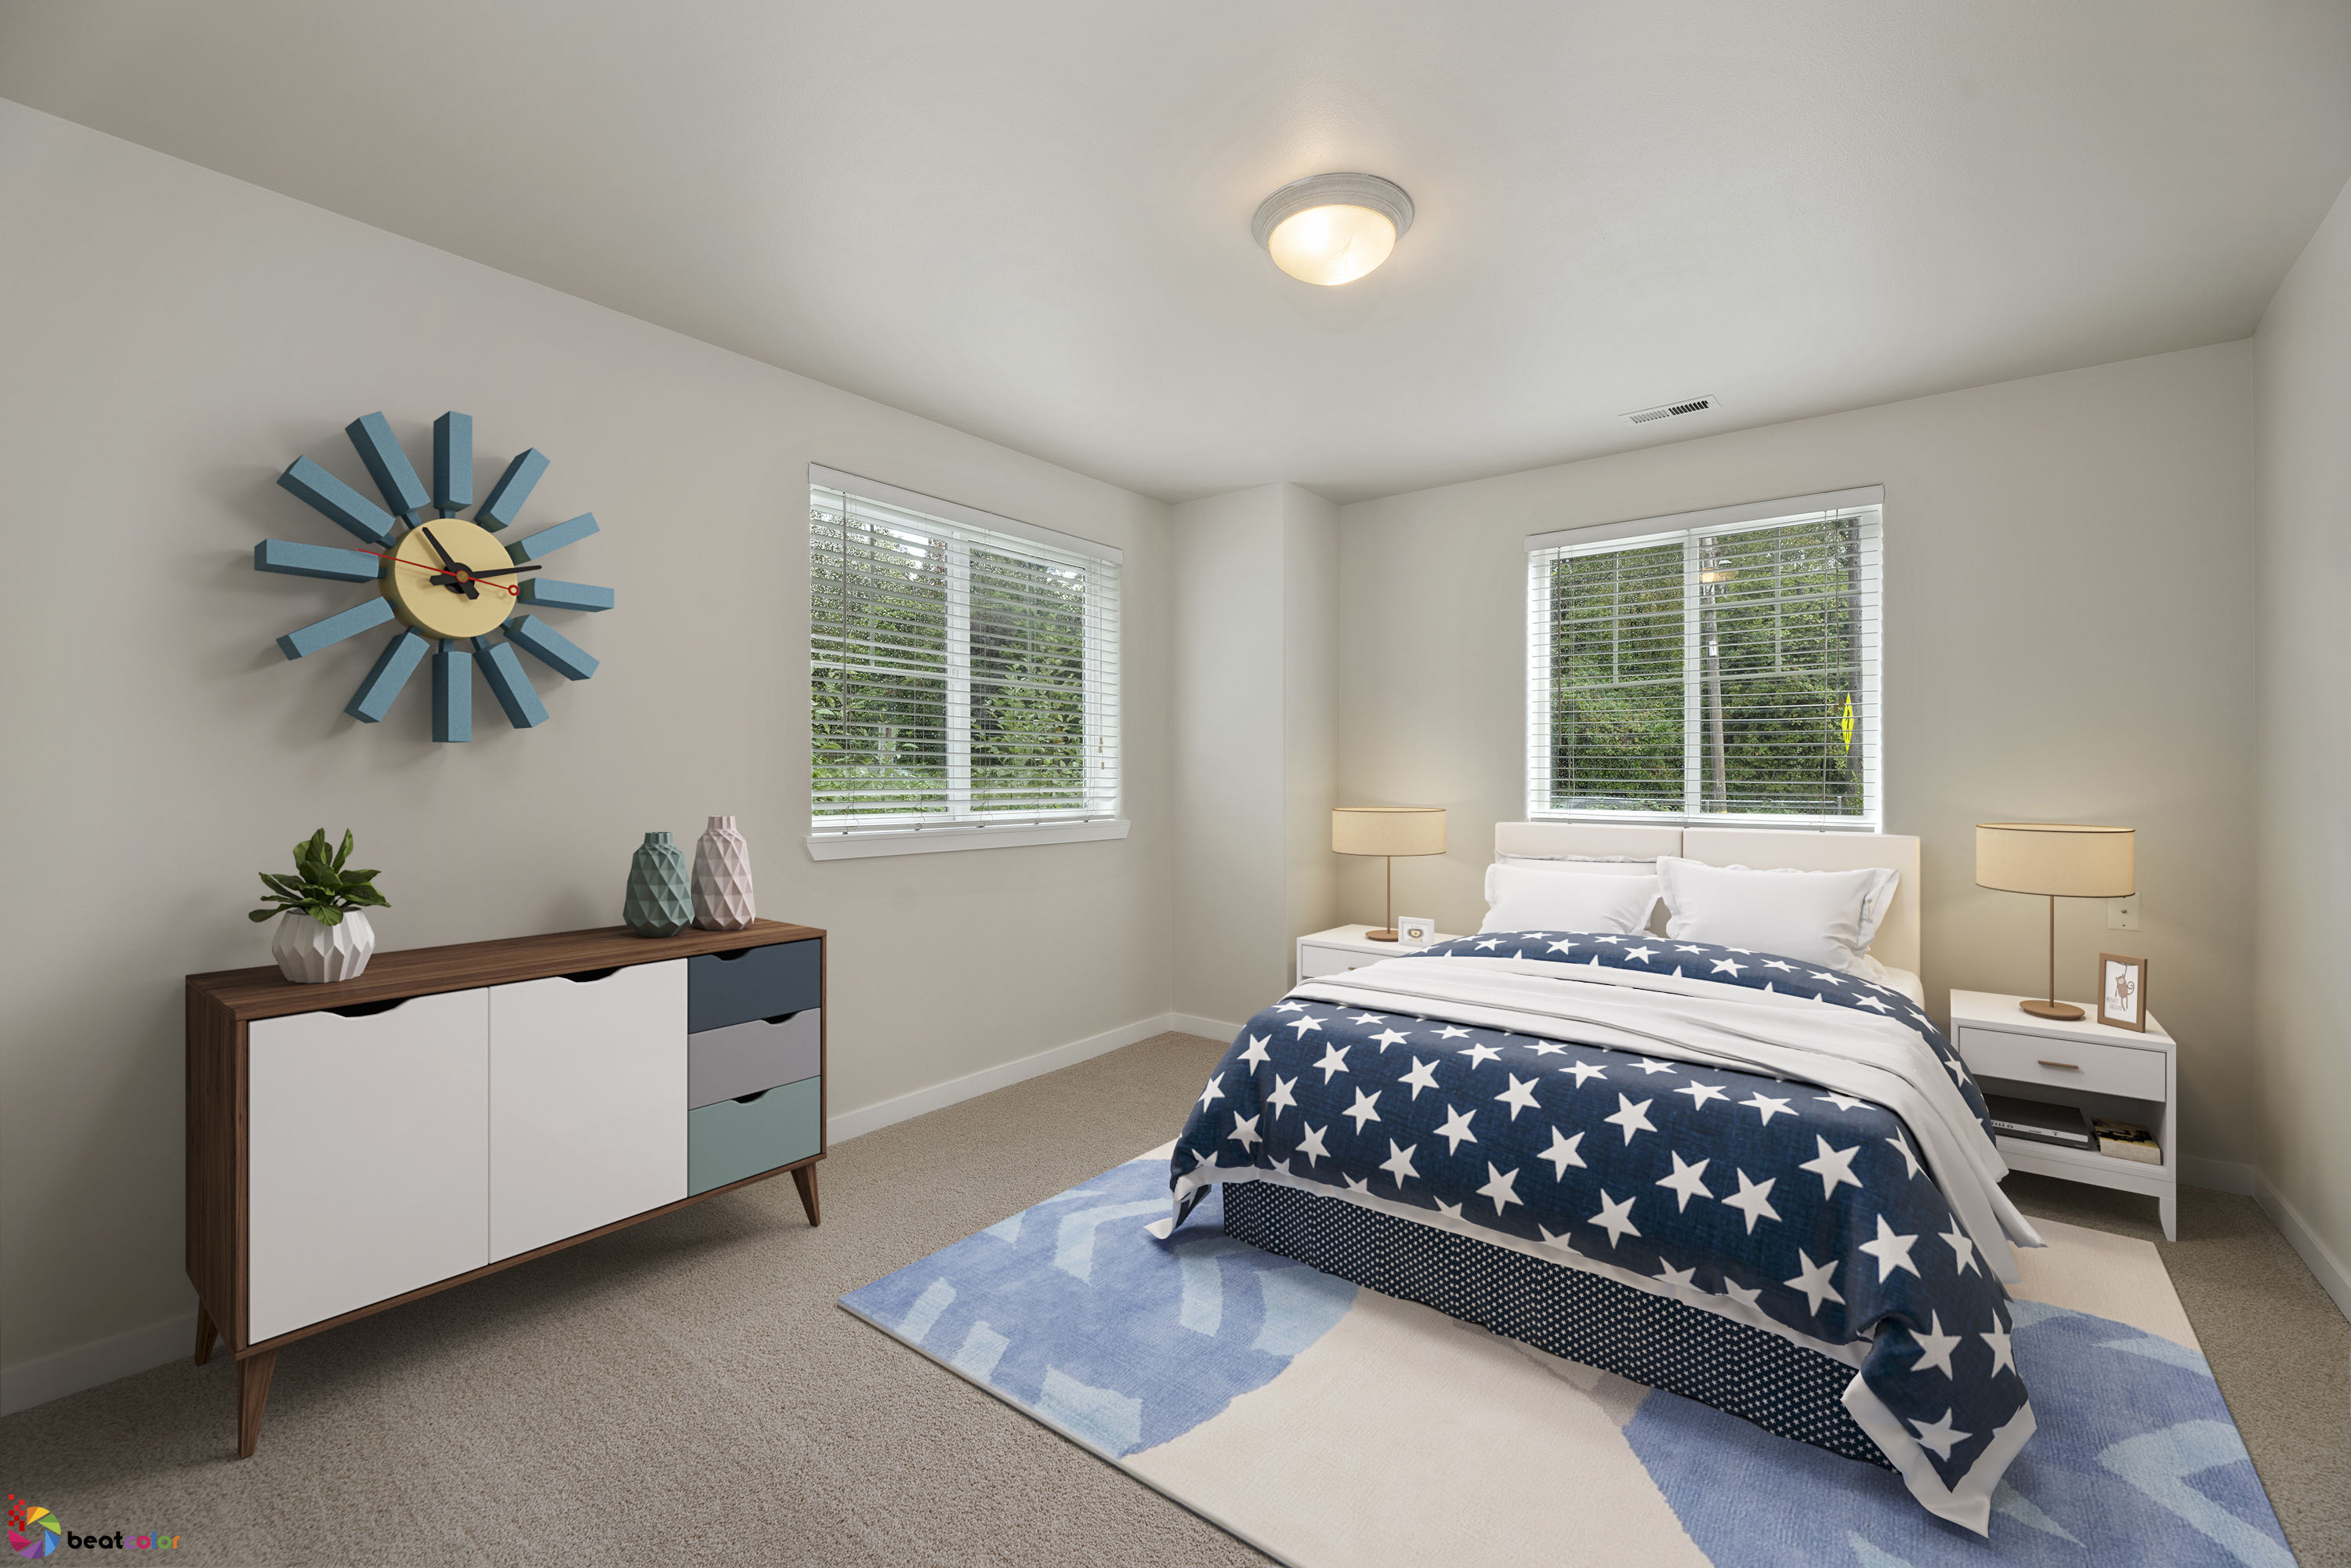 Staging Kids Bedroom When Selling Your Home